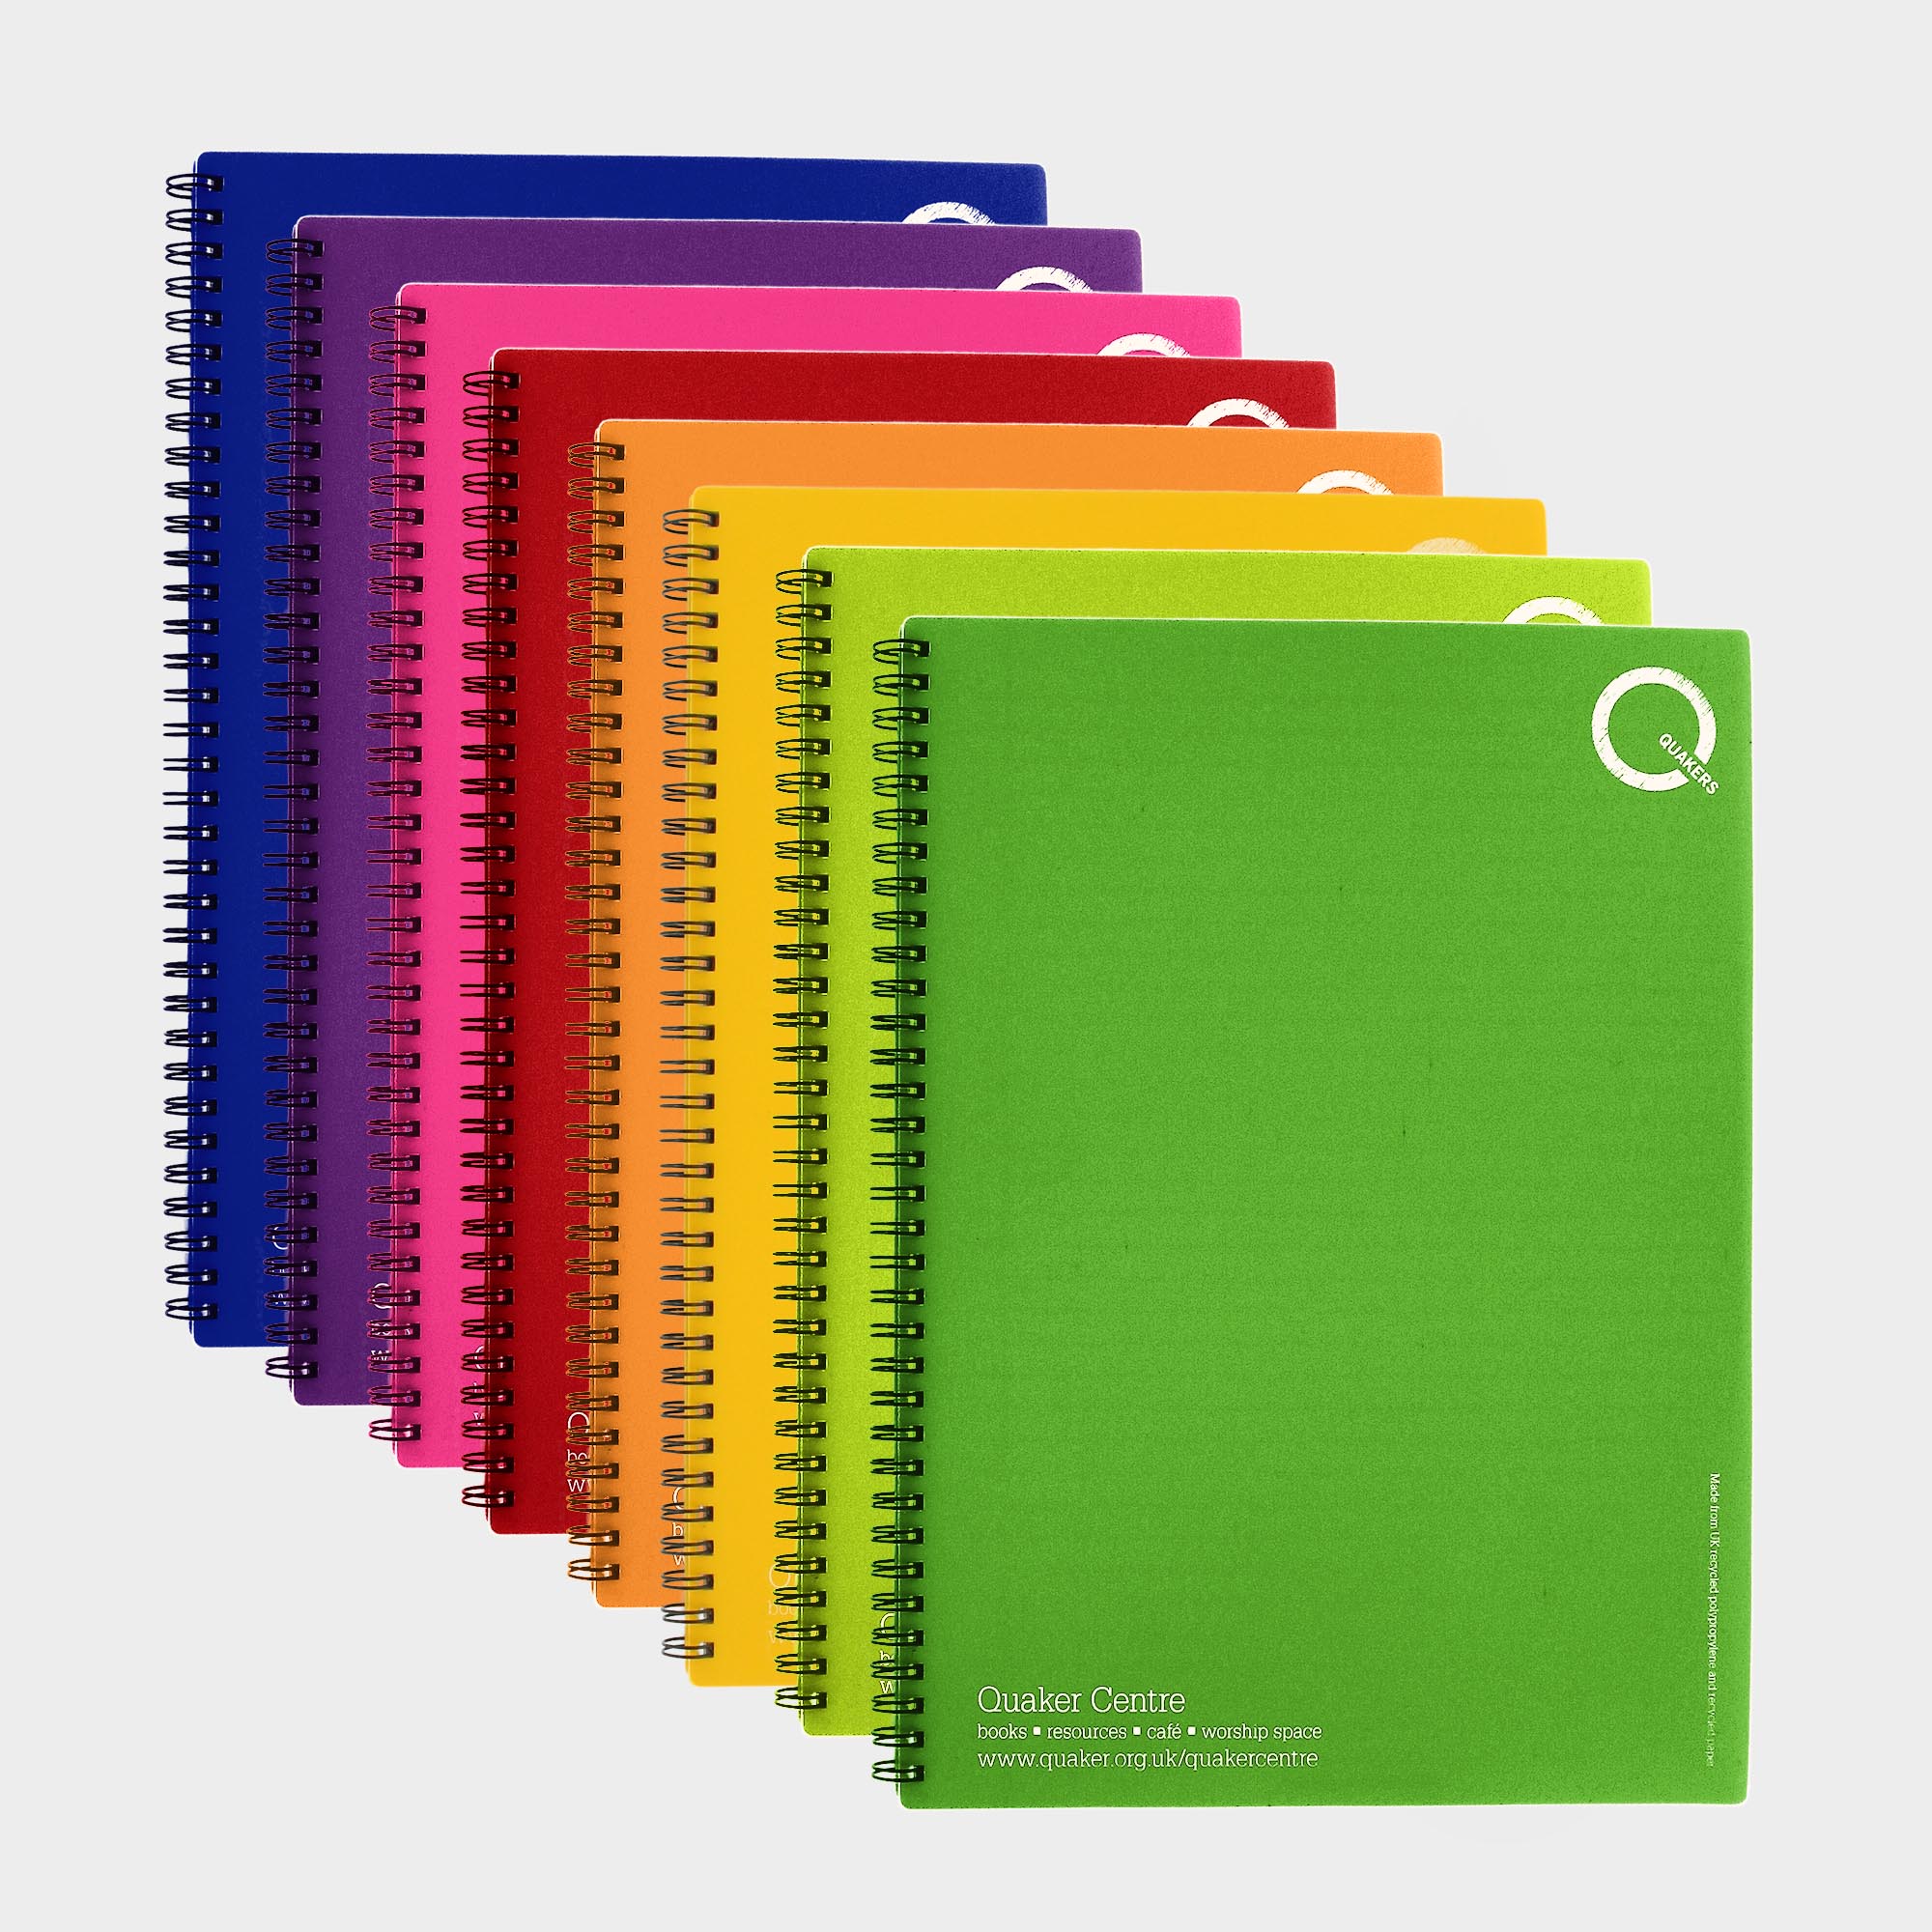 The Green & Good Polypropylene Notebook comes with recycled paper - size A4. The front and back cover is made from recycled polypropylene (500 microns), the sheets are 80gsm. Comes wirebound with 50 sheets as standard. Please contact us if you require a bespoke number of sheets.